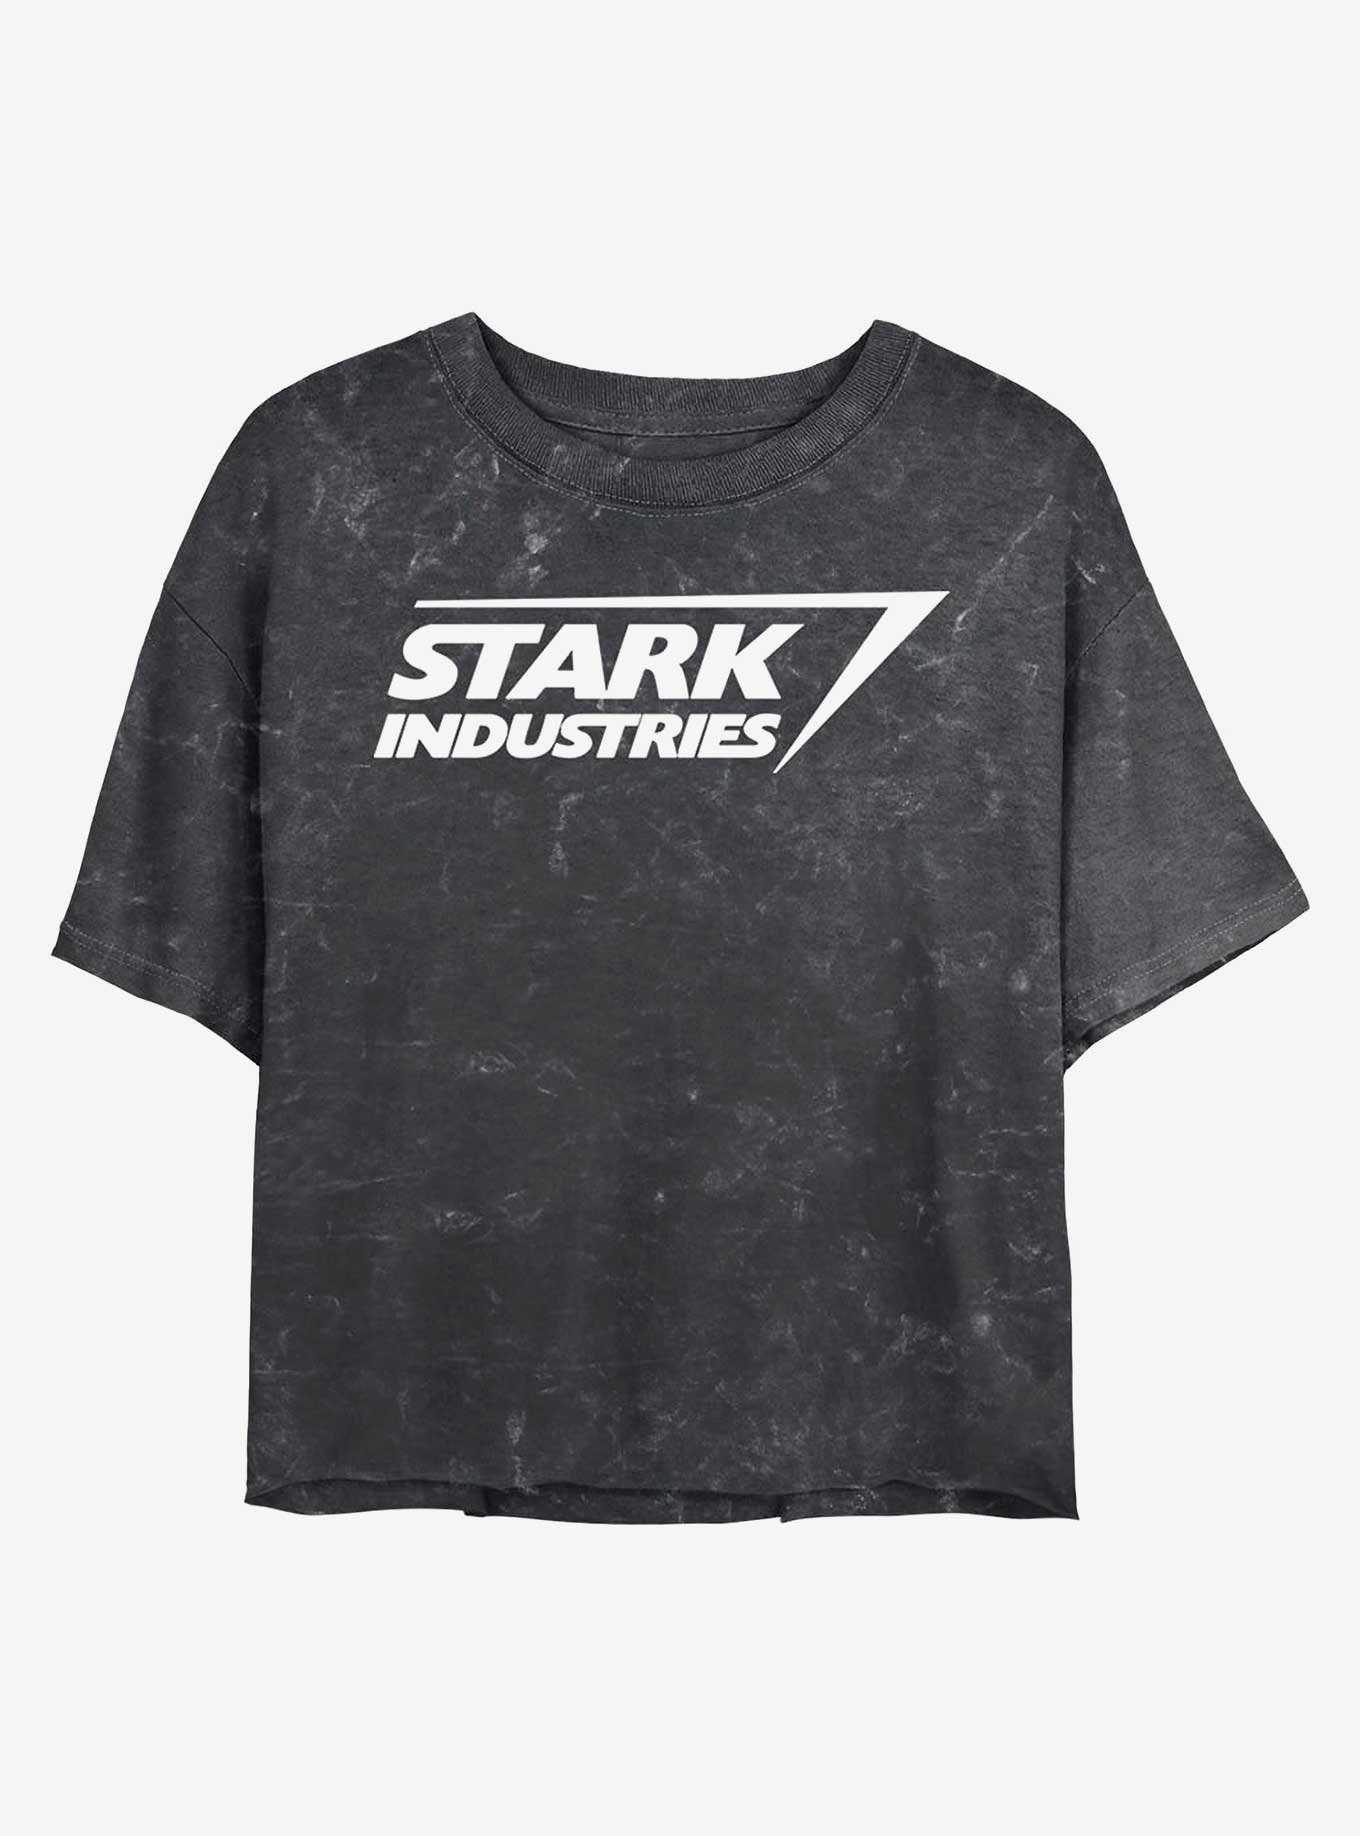 OFFICIAL Iron Man | & Hot Merchandise T-Shirts Topic